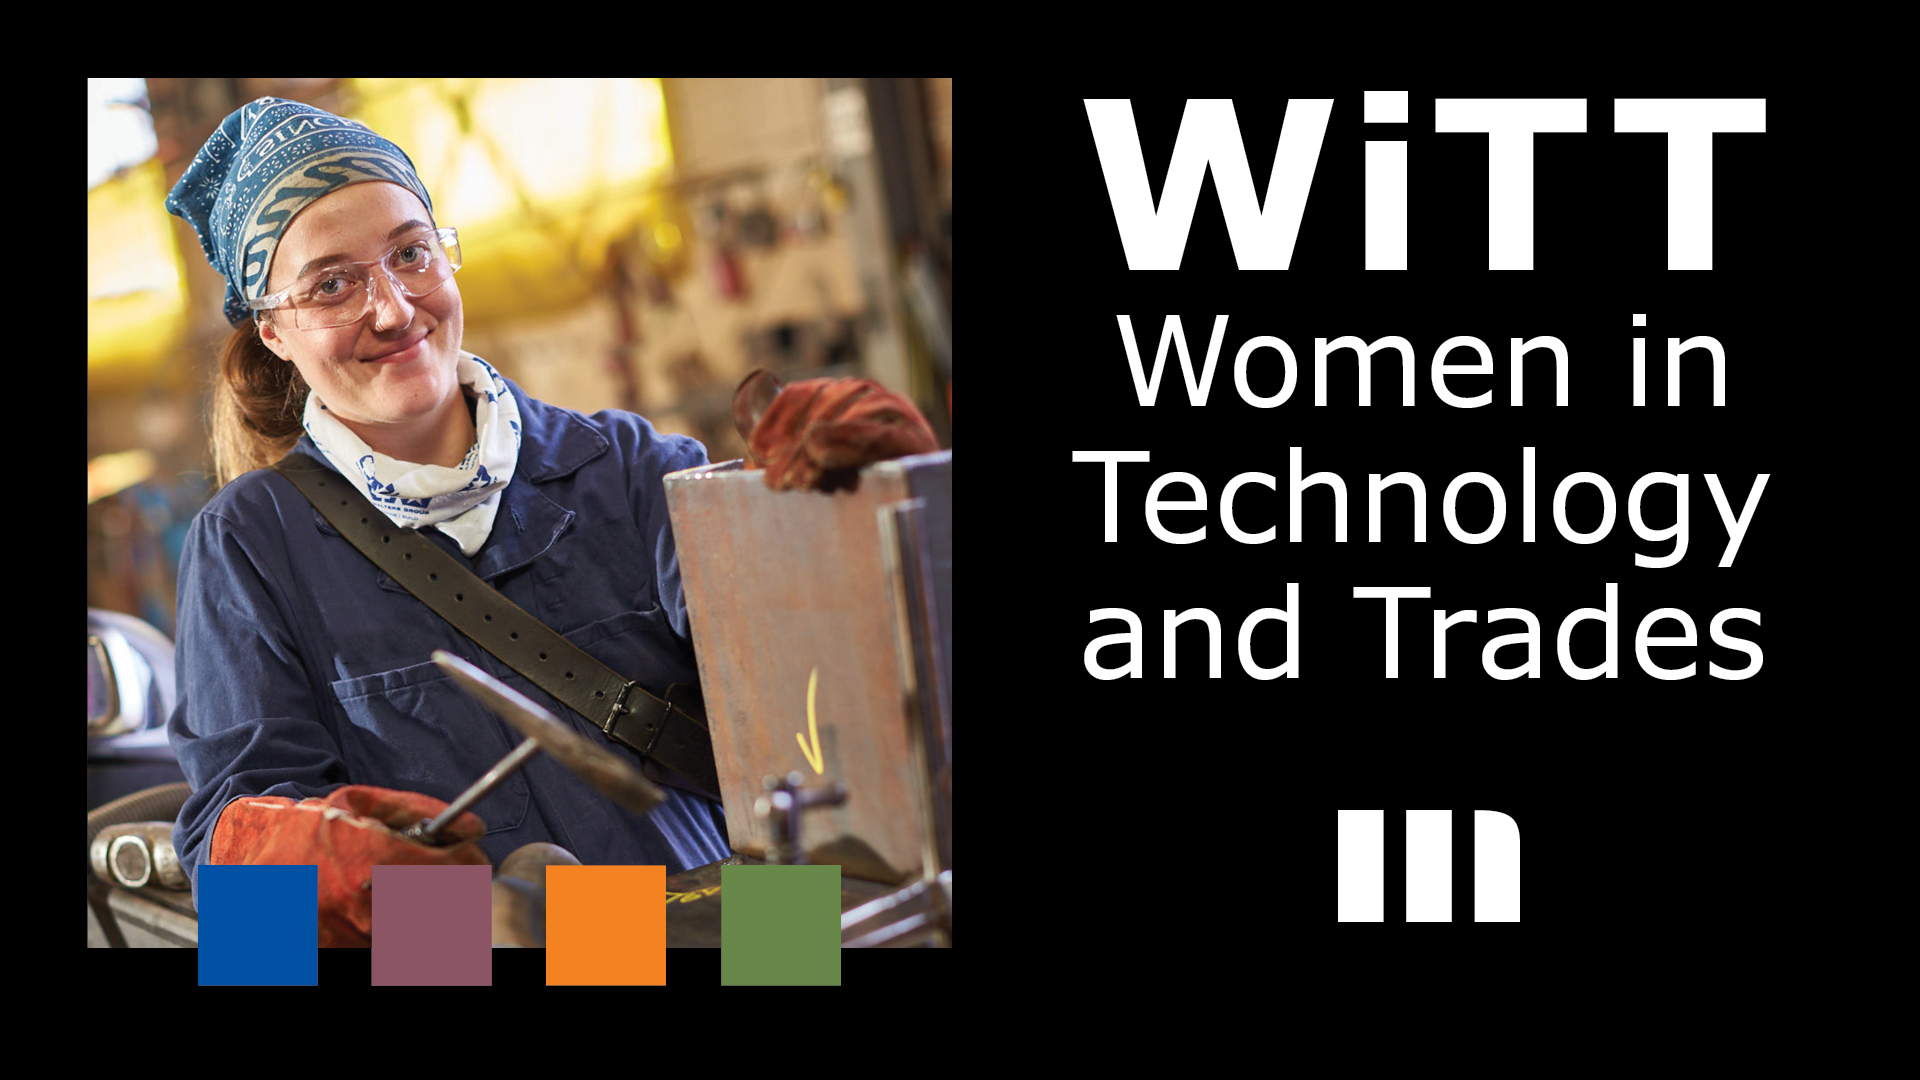 Image showing a woman in Technology & Trades with the title" WiTT Womoen in Technology and Trades"